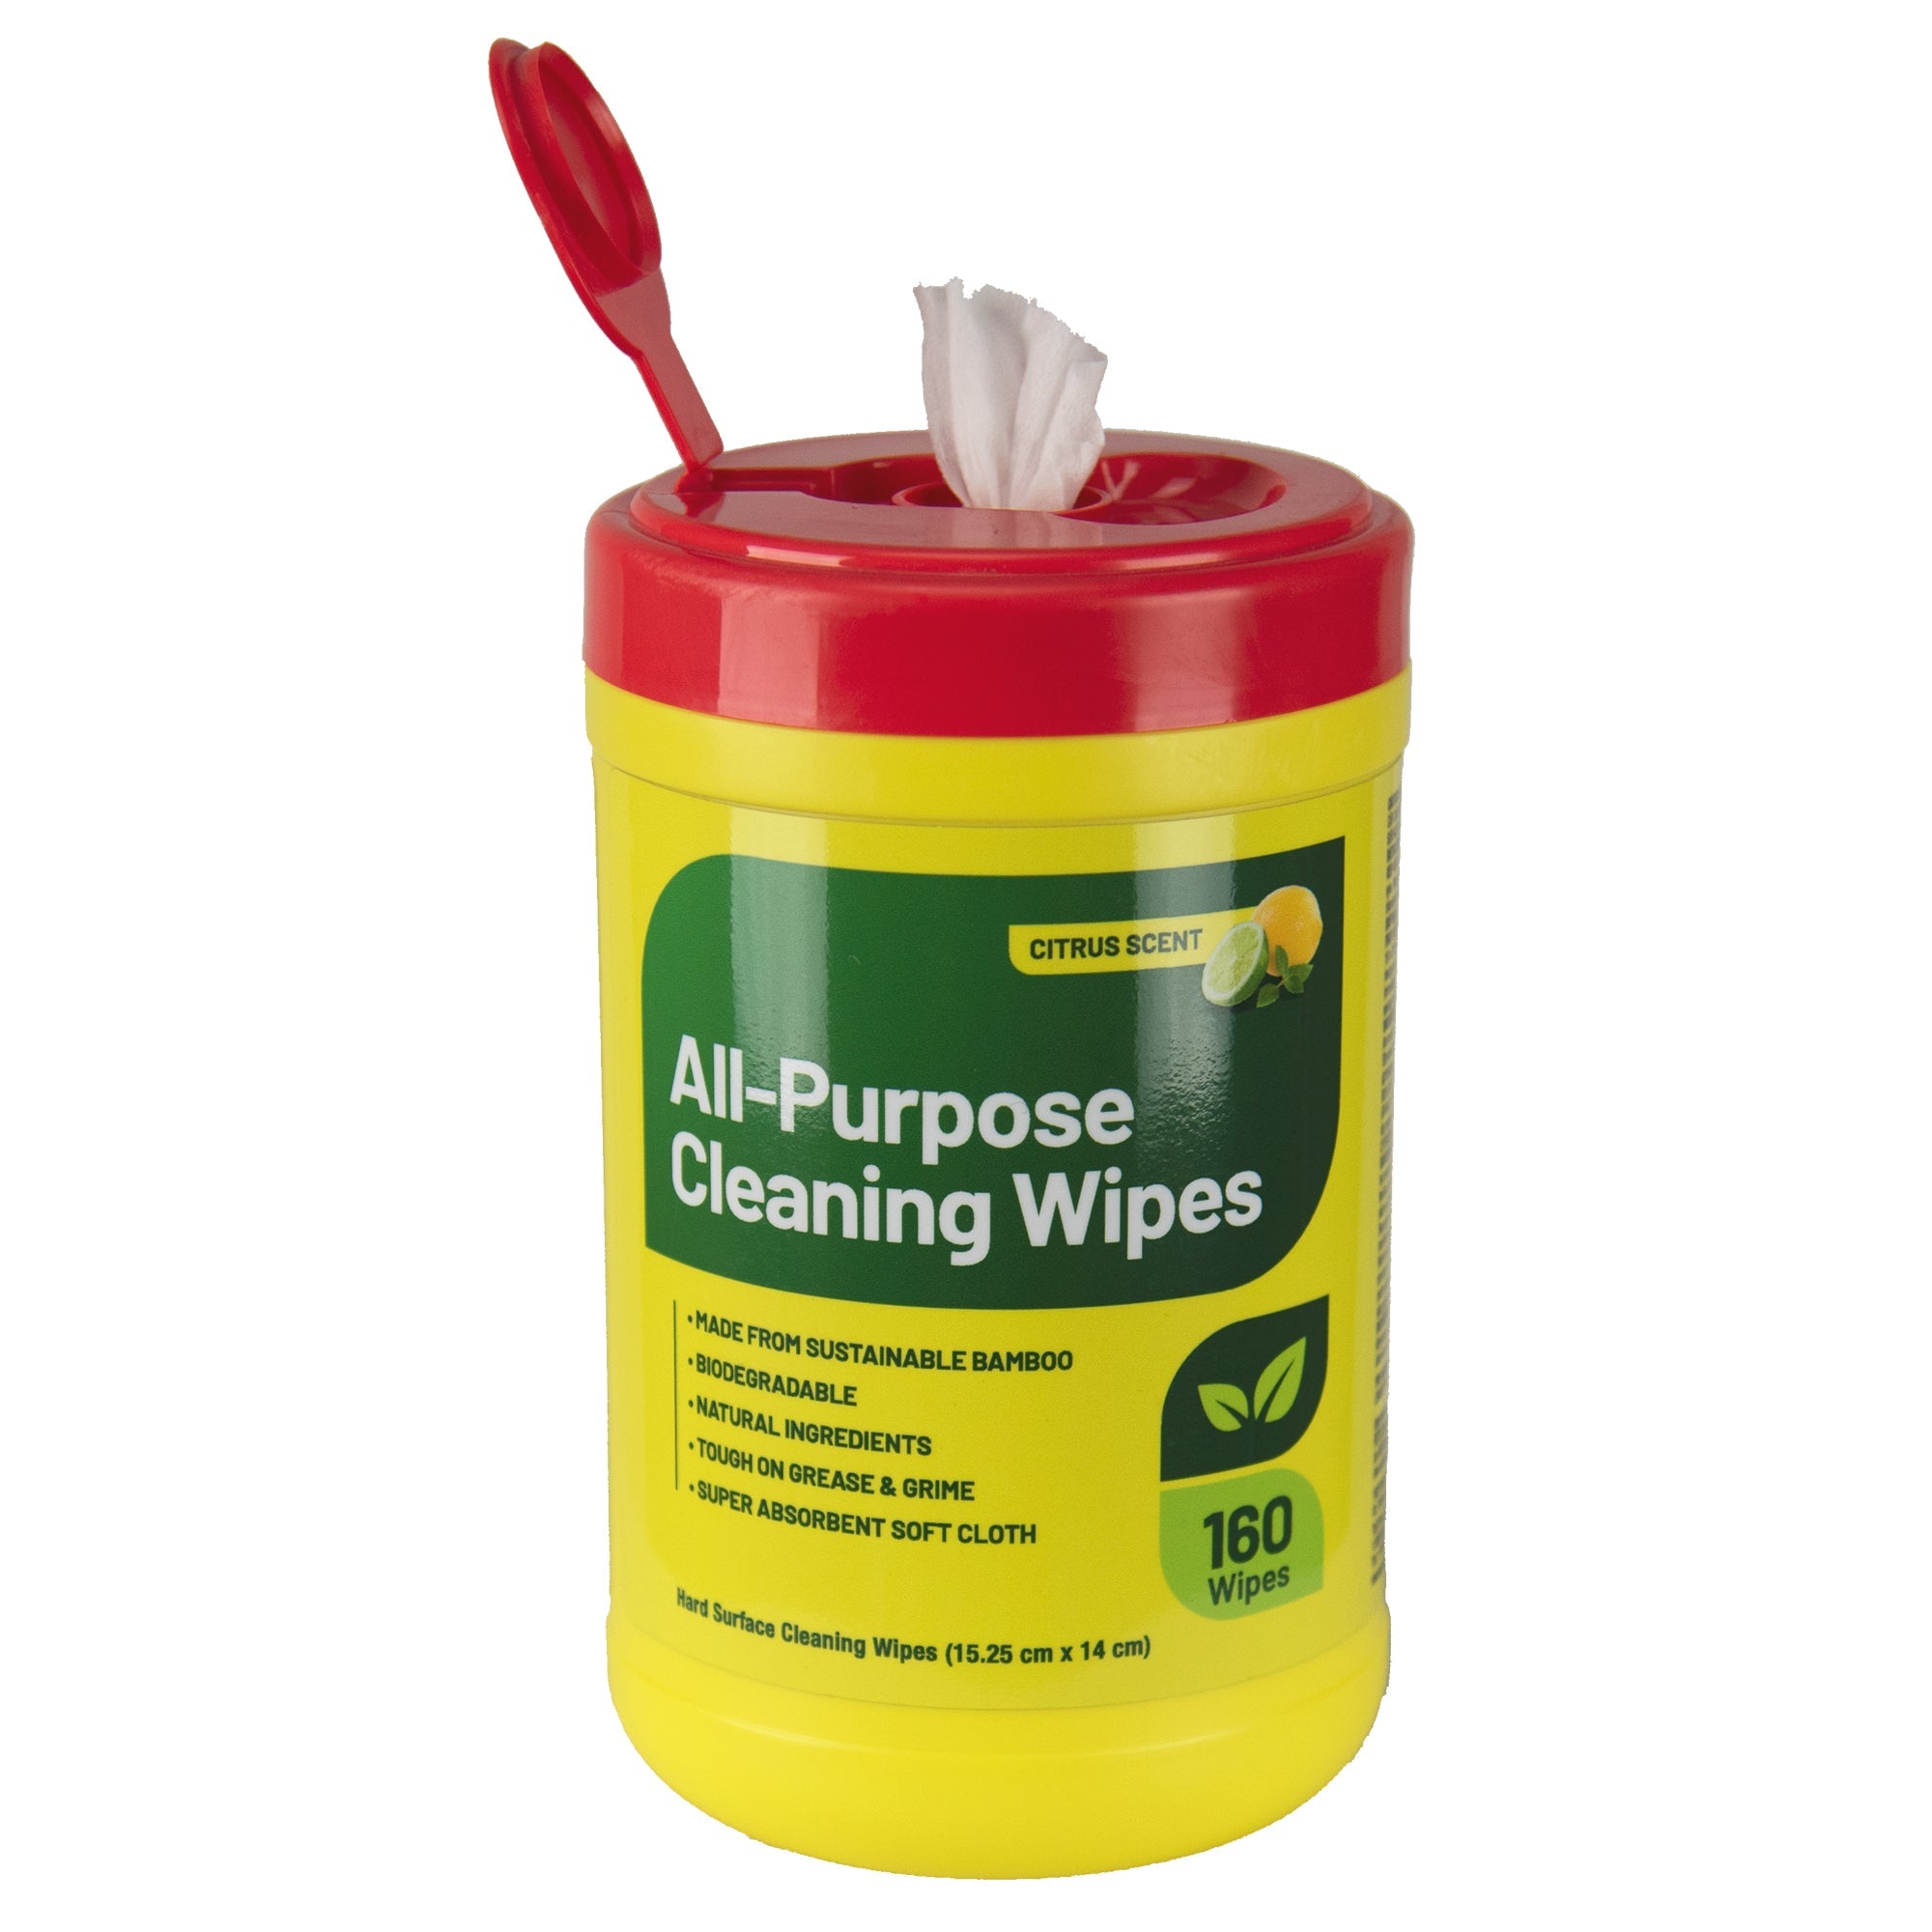 All-Purpose Cleaning Wipes 90 count canister